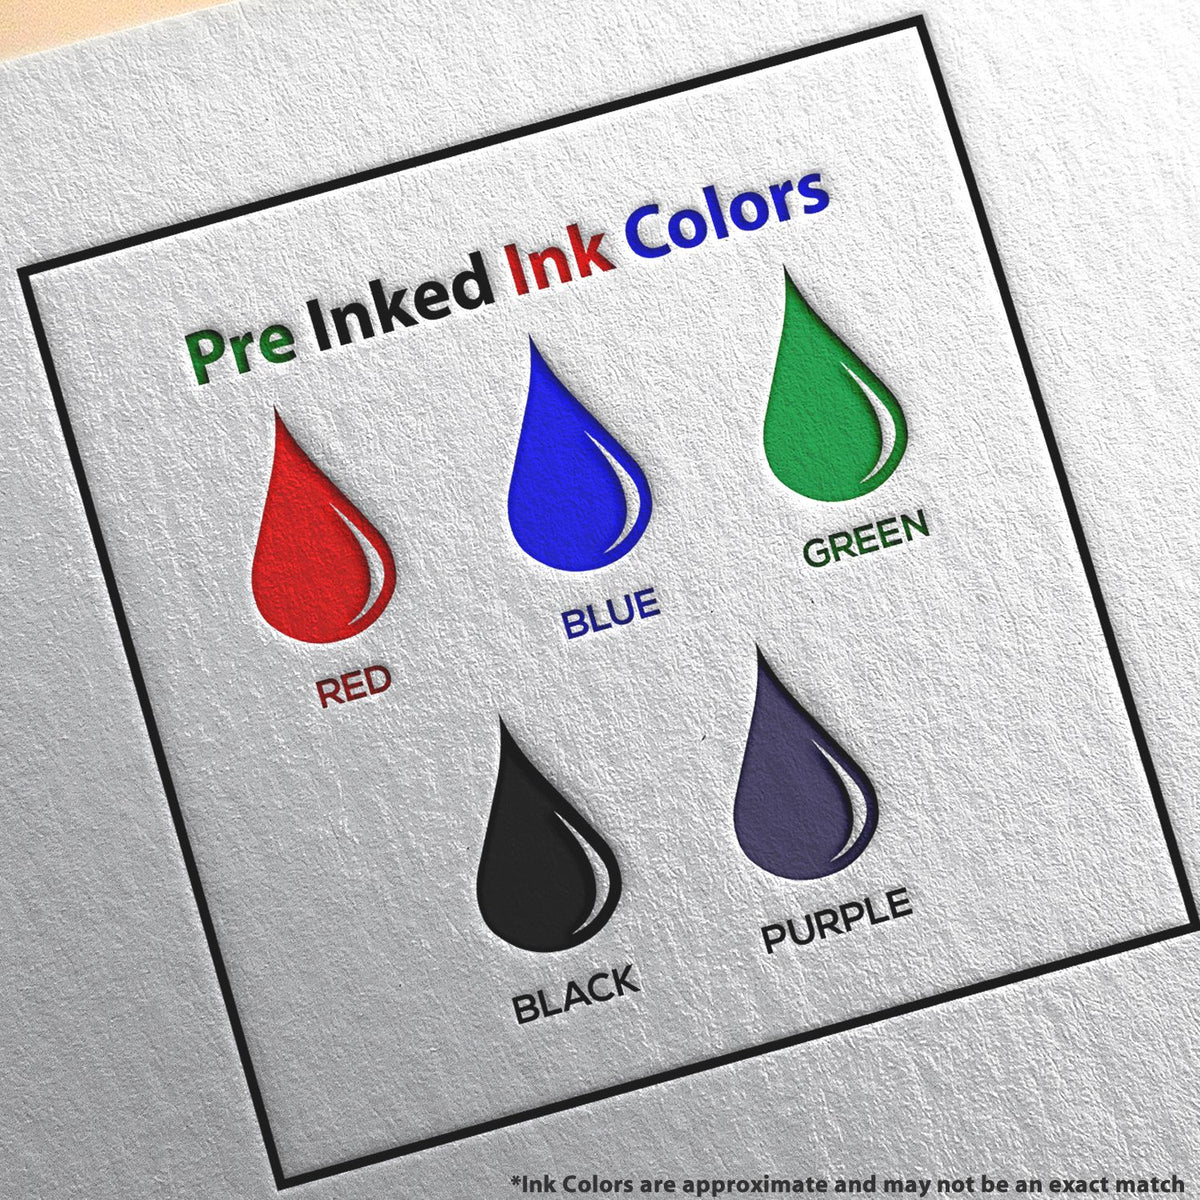 A picture showing the different ink colors or hues available for the Slim Pre-Inked Rectangular Notary Stamp for South Dakota product.